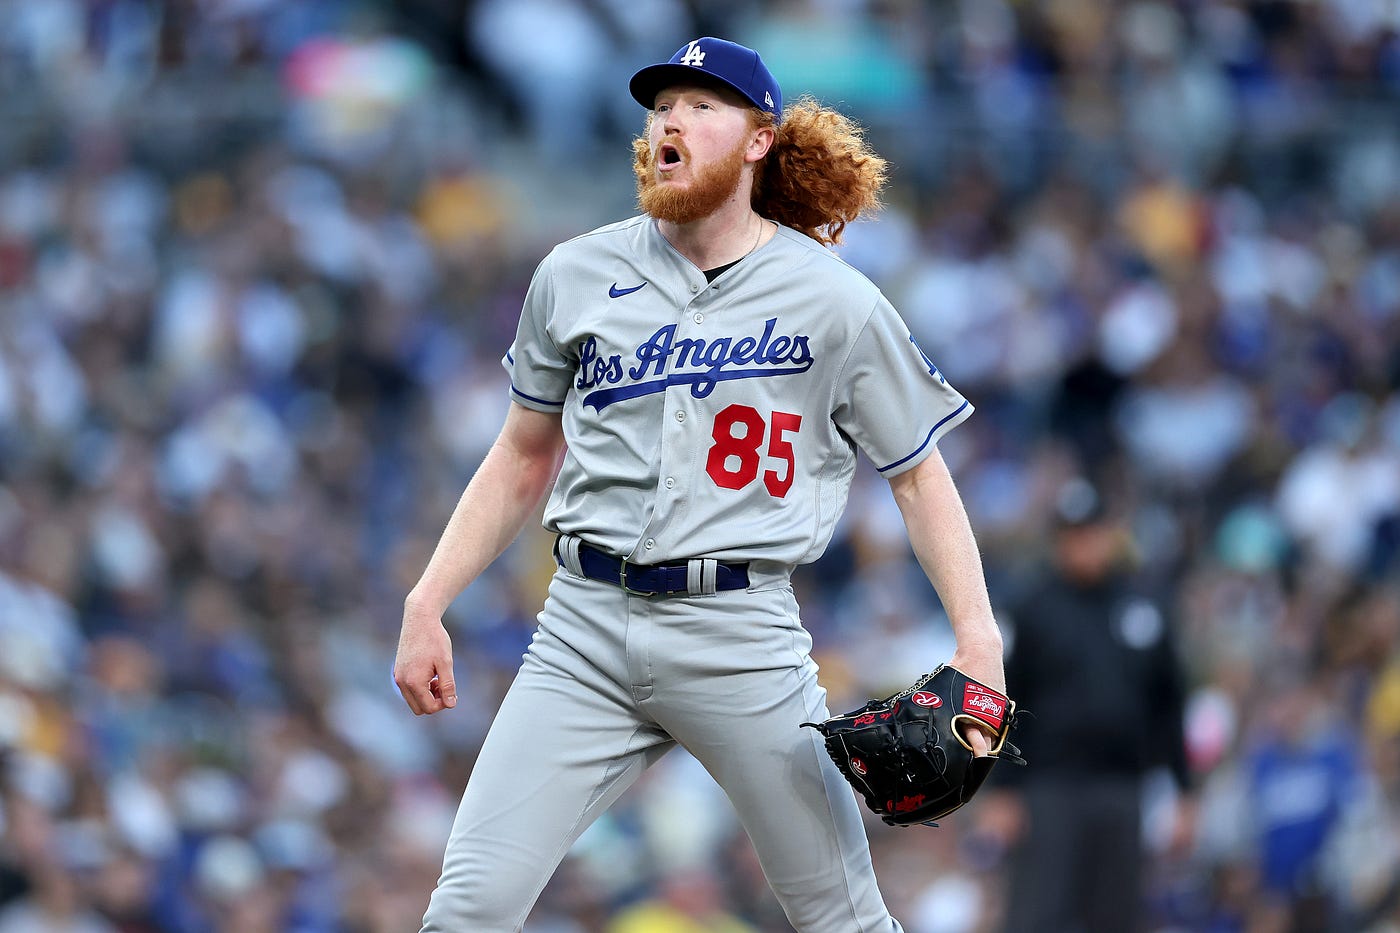 May locks up the Padres to help the Dodgers even the series